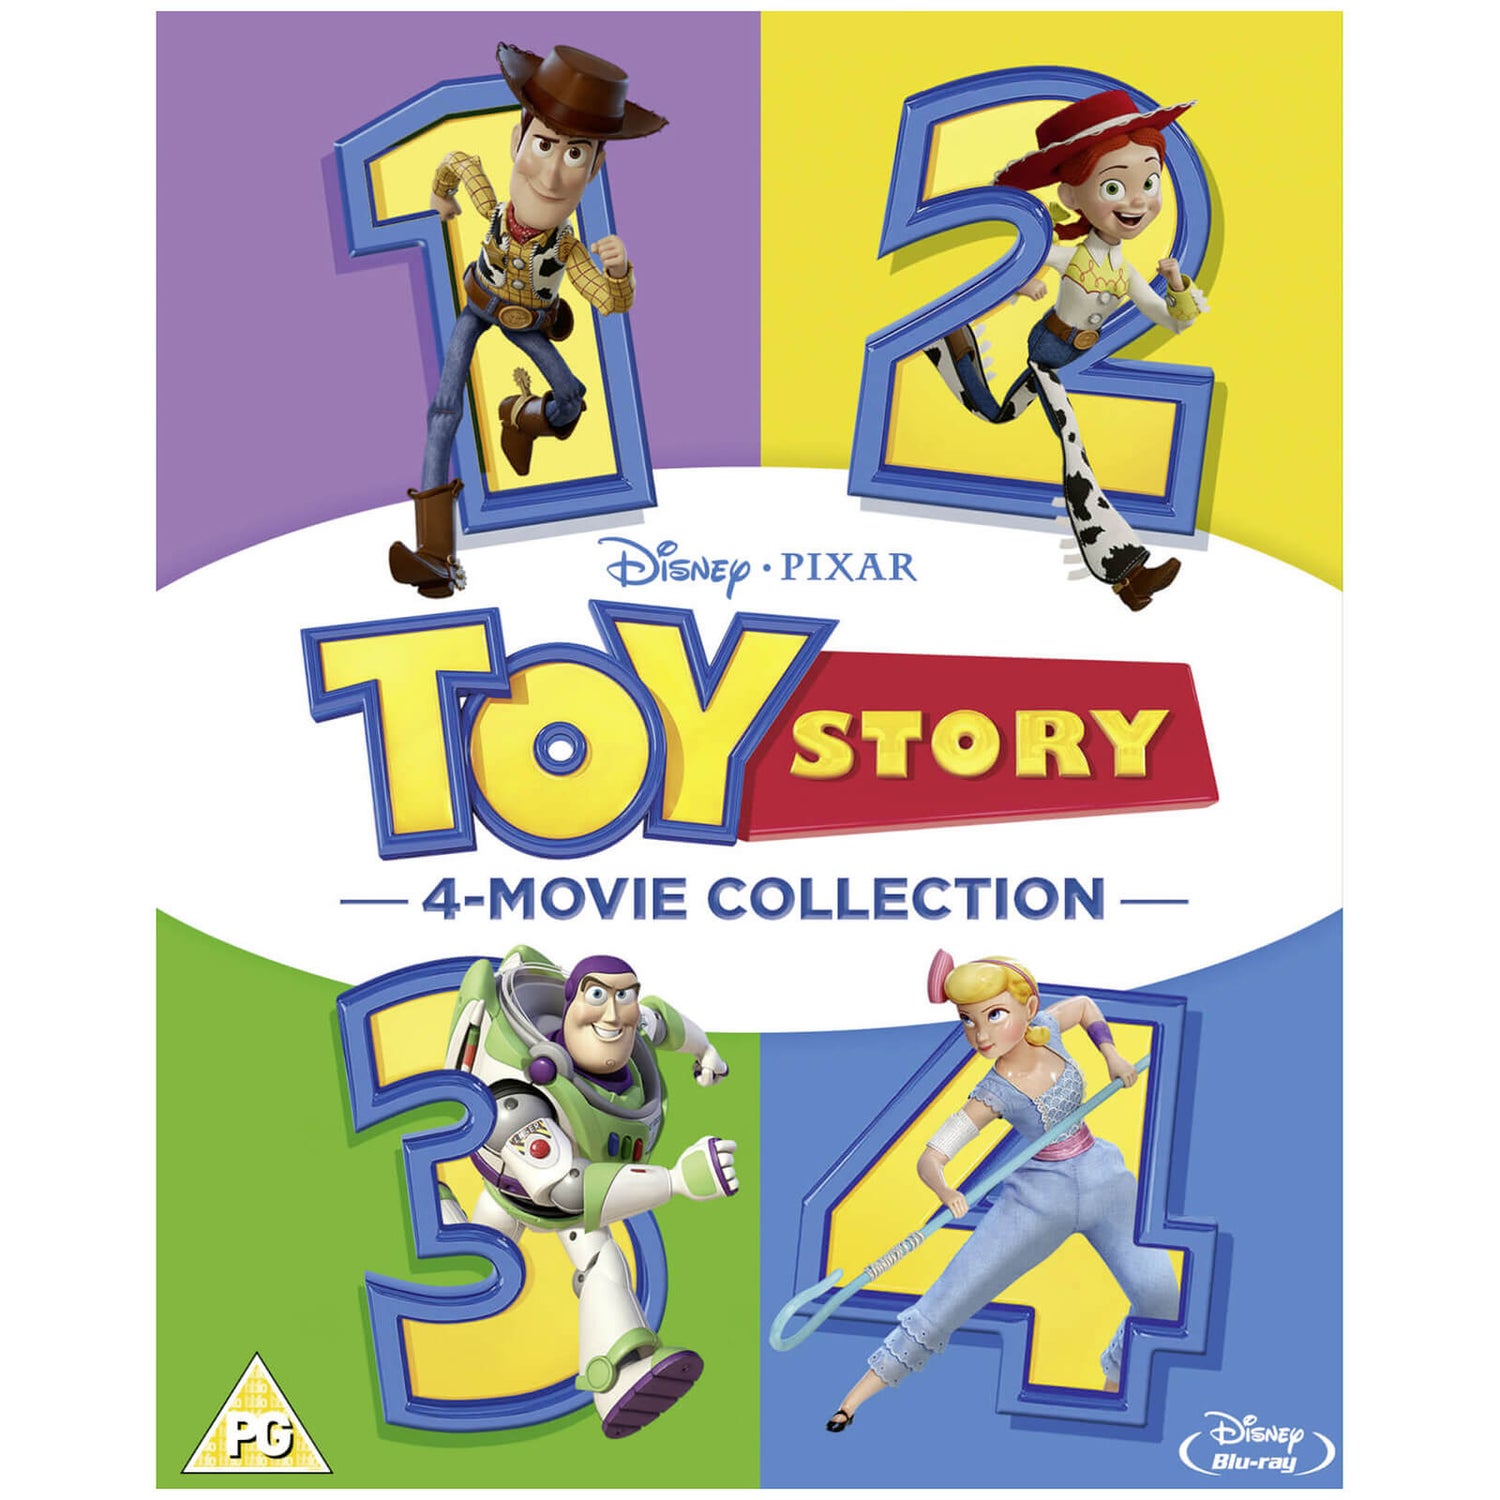 Toy Story Coffret complet 1-4